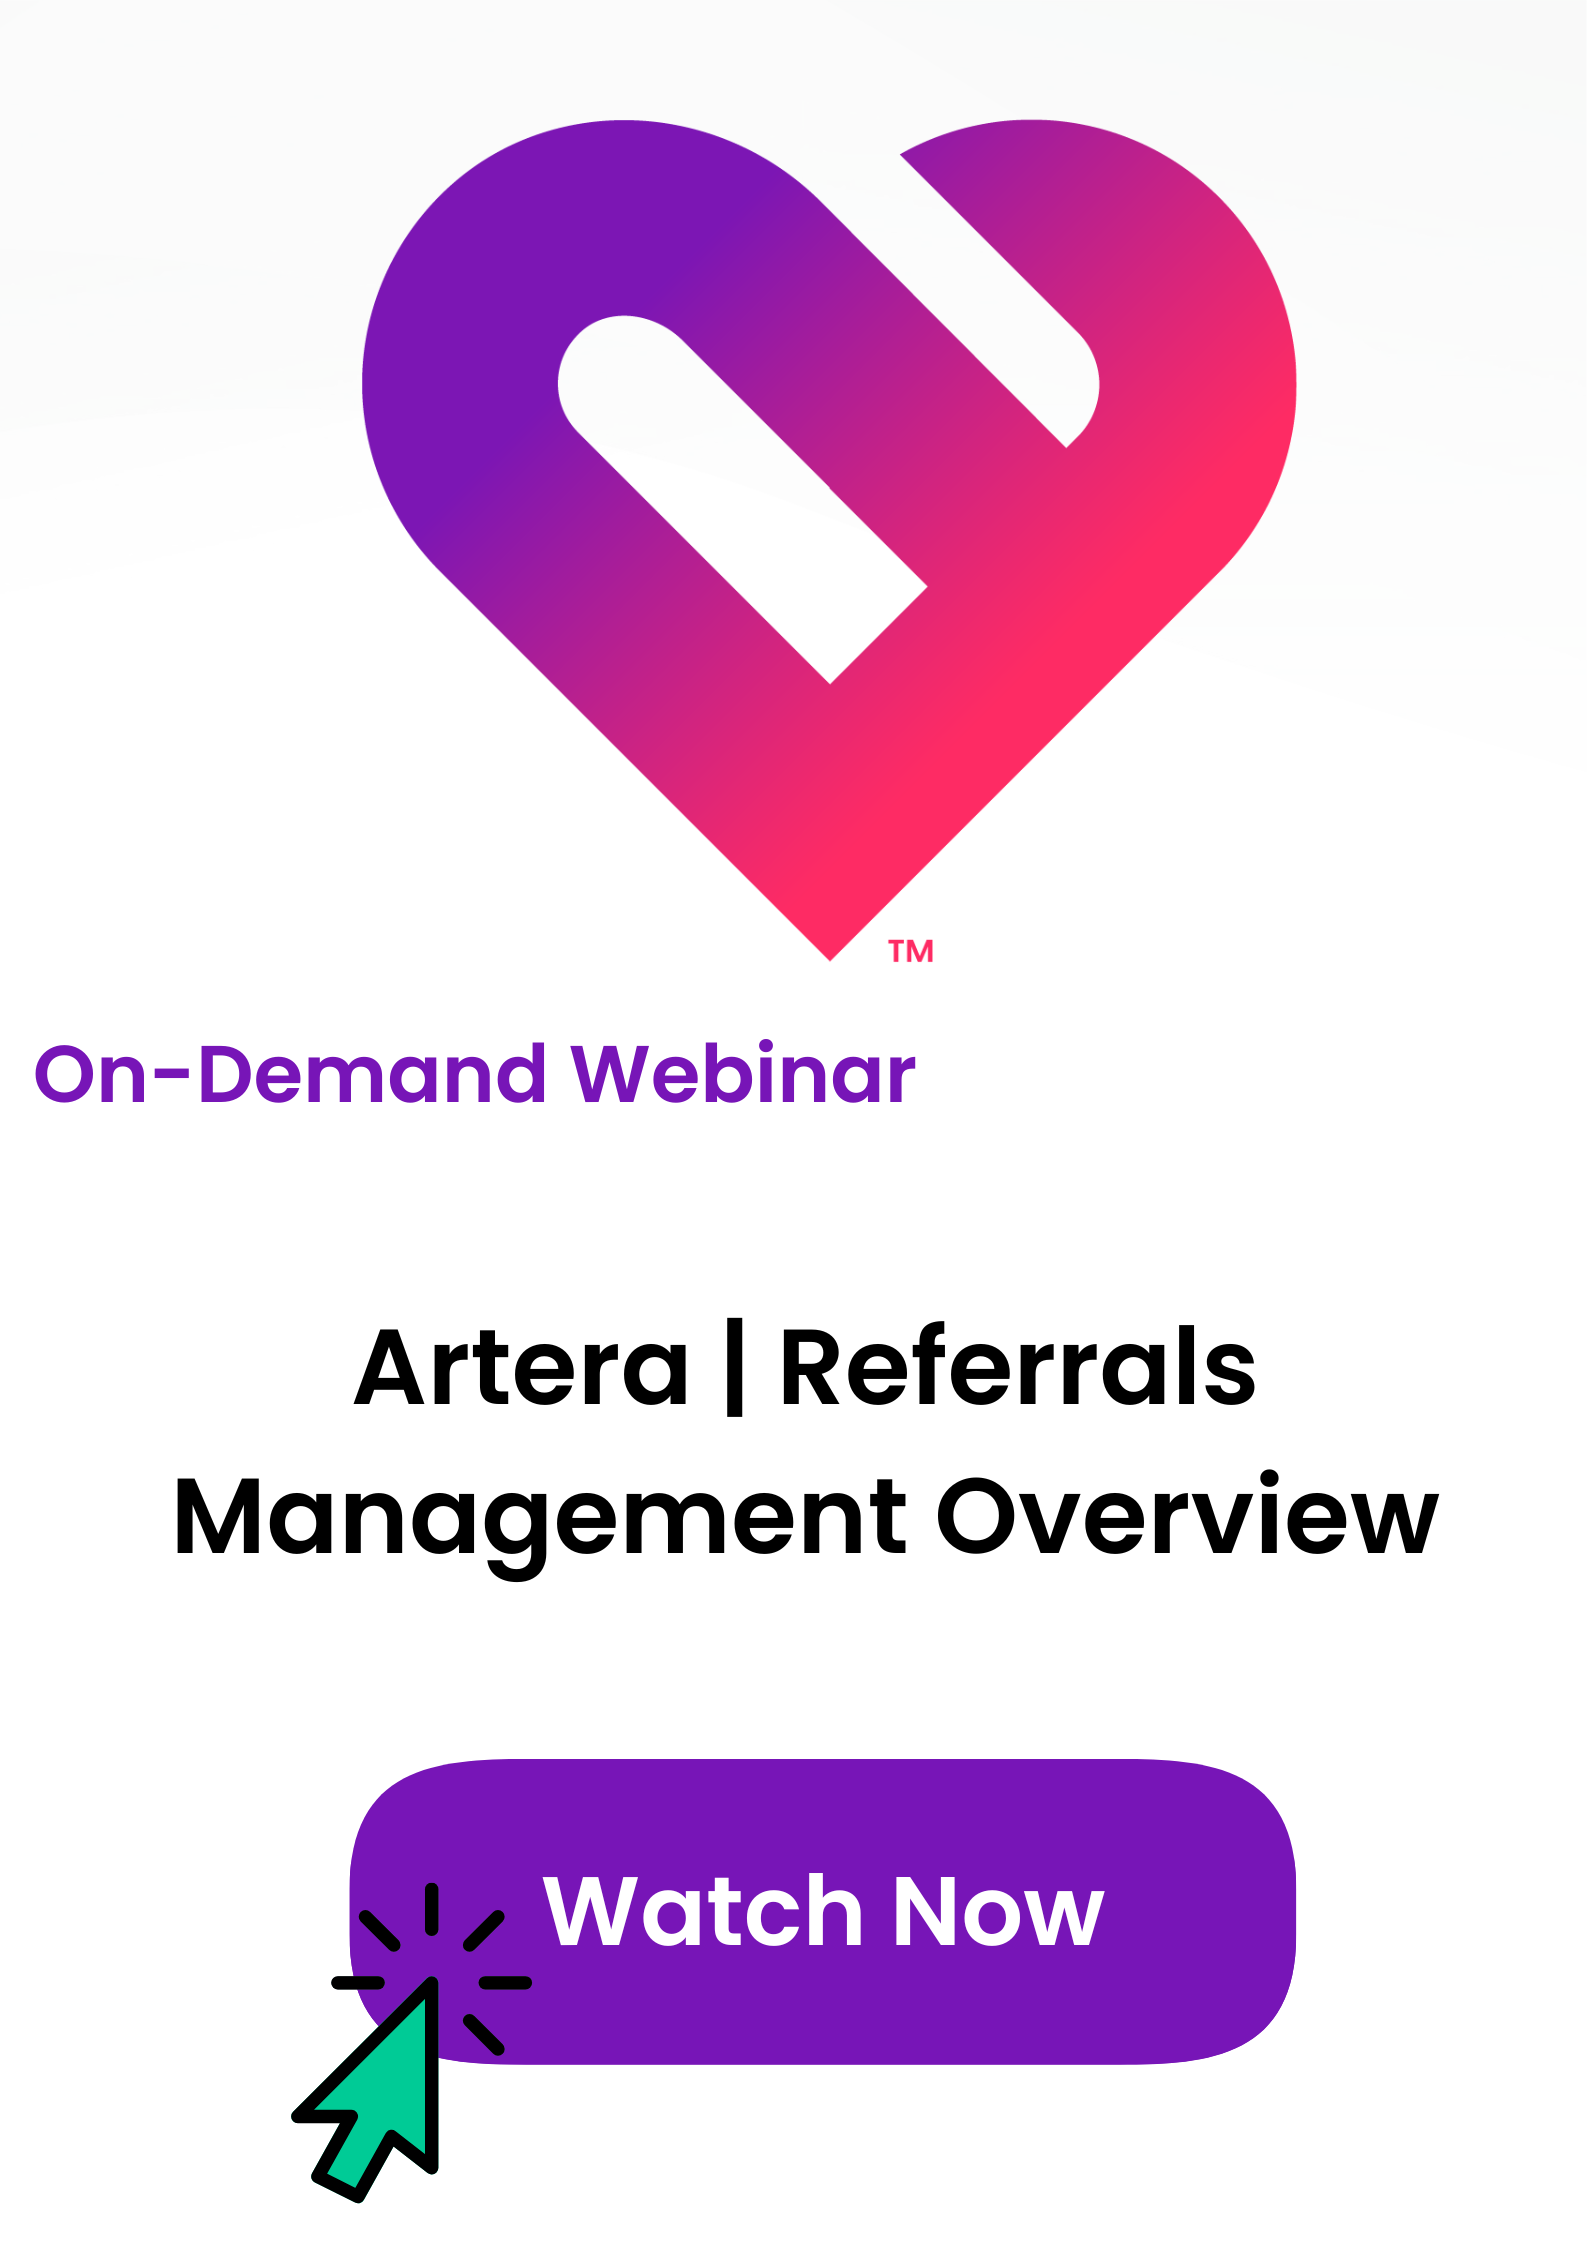 On-demand webinar tile for Referrals Management Overview, click to watch now